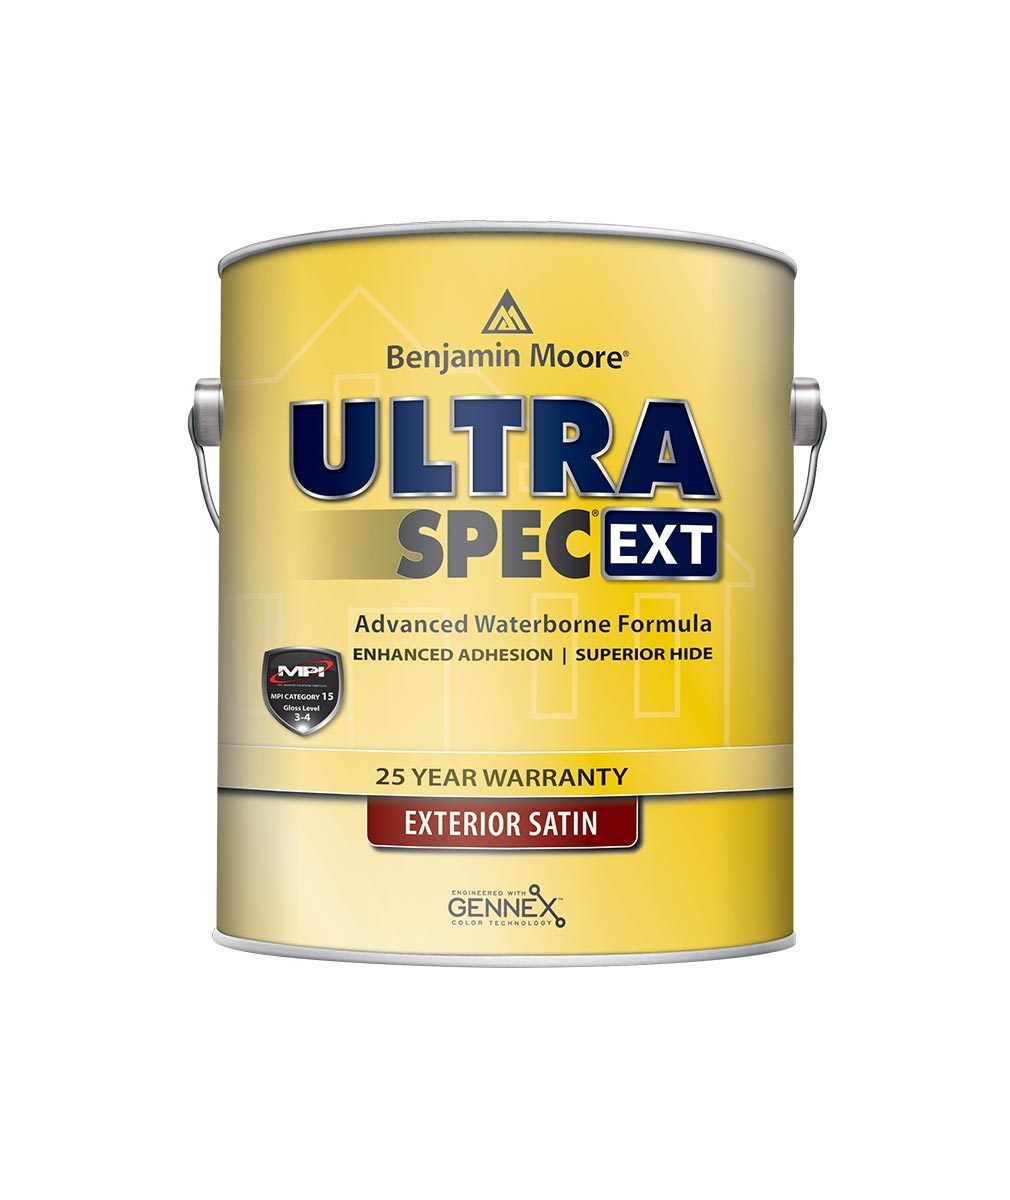 Benjamin Moore Ultra Spec EXT exterior paint in satin finish available at Clement's Paint